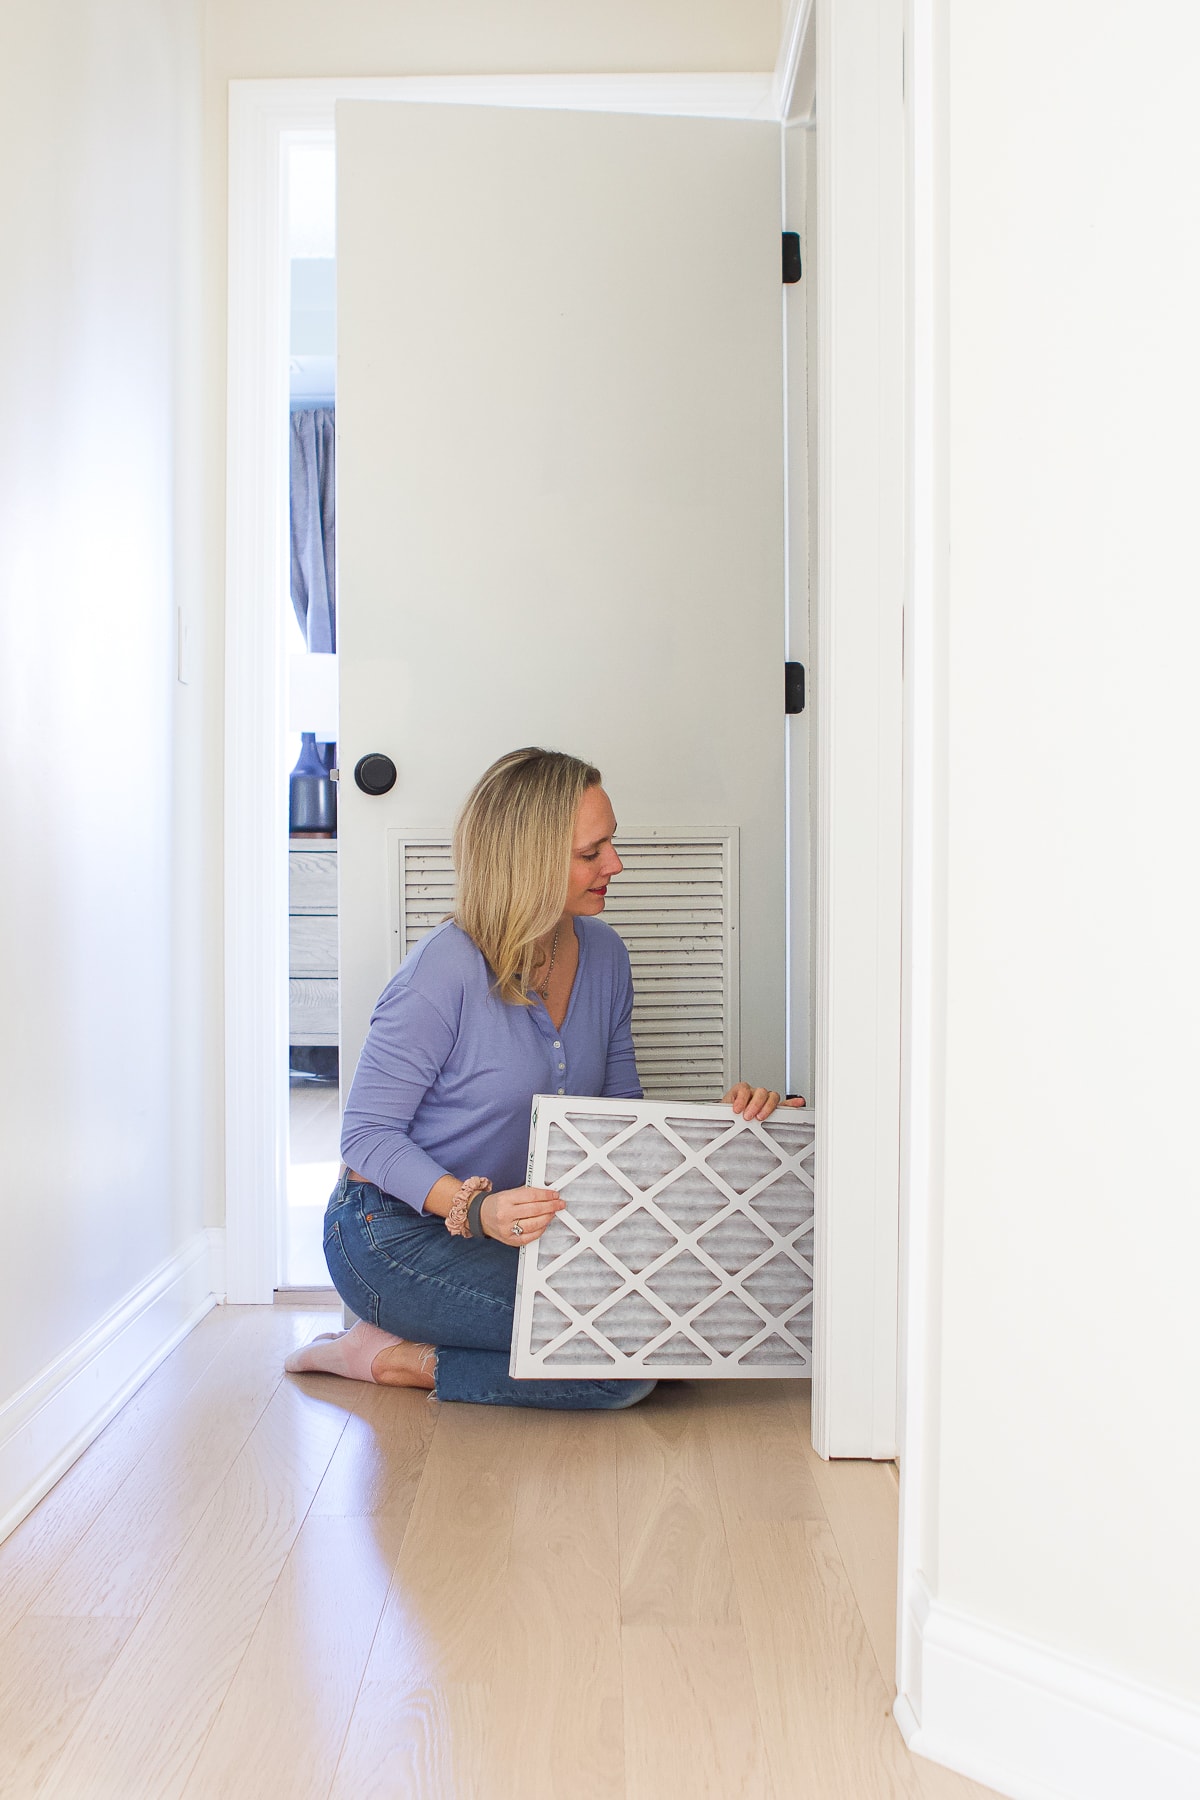 How To Change An Air Filter In 5 Easy Steps